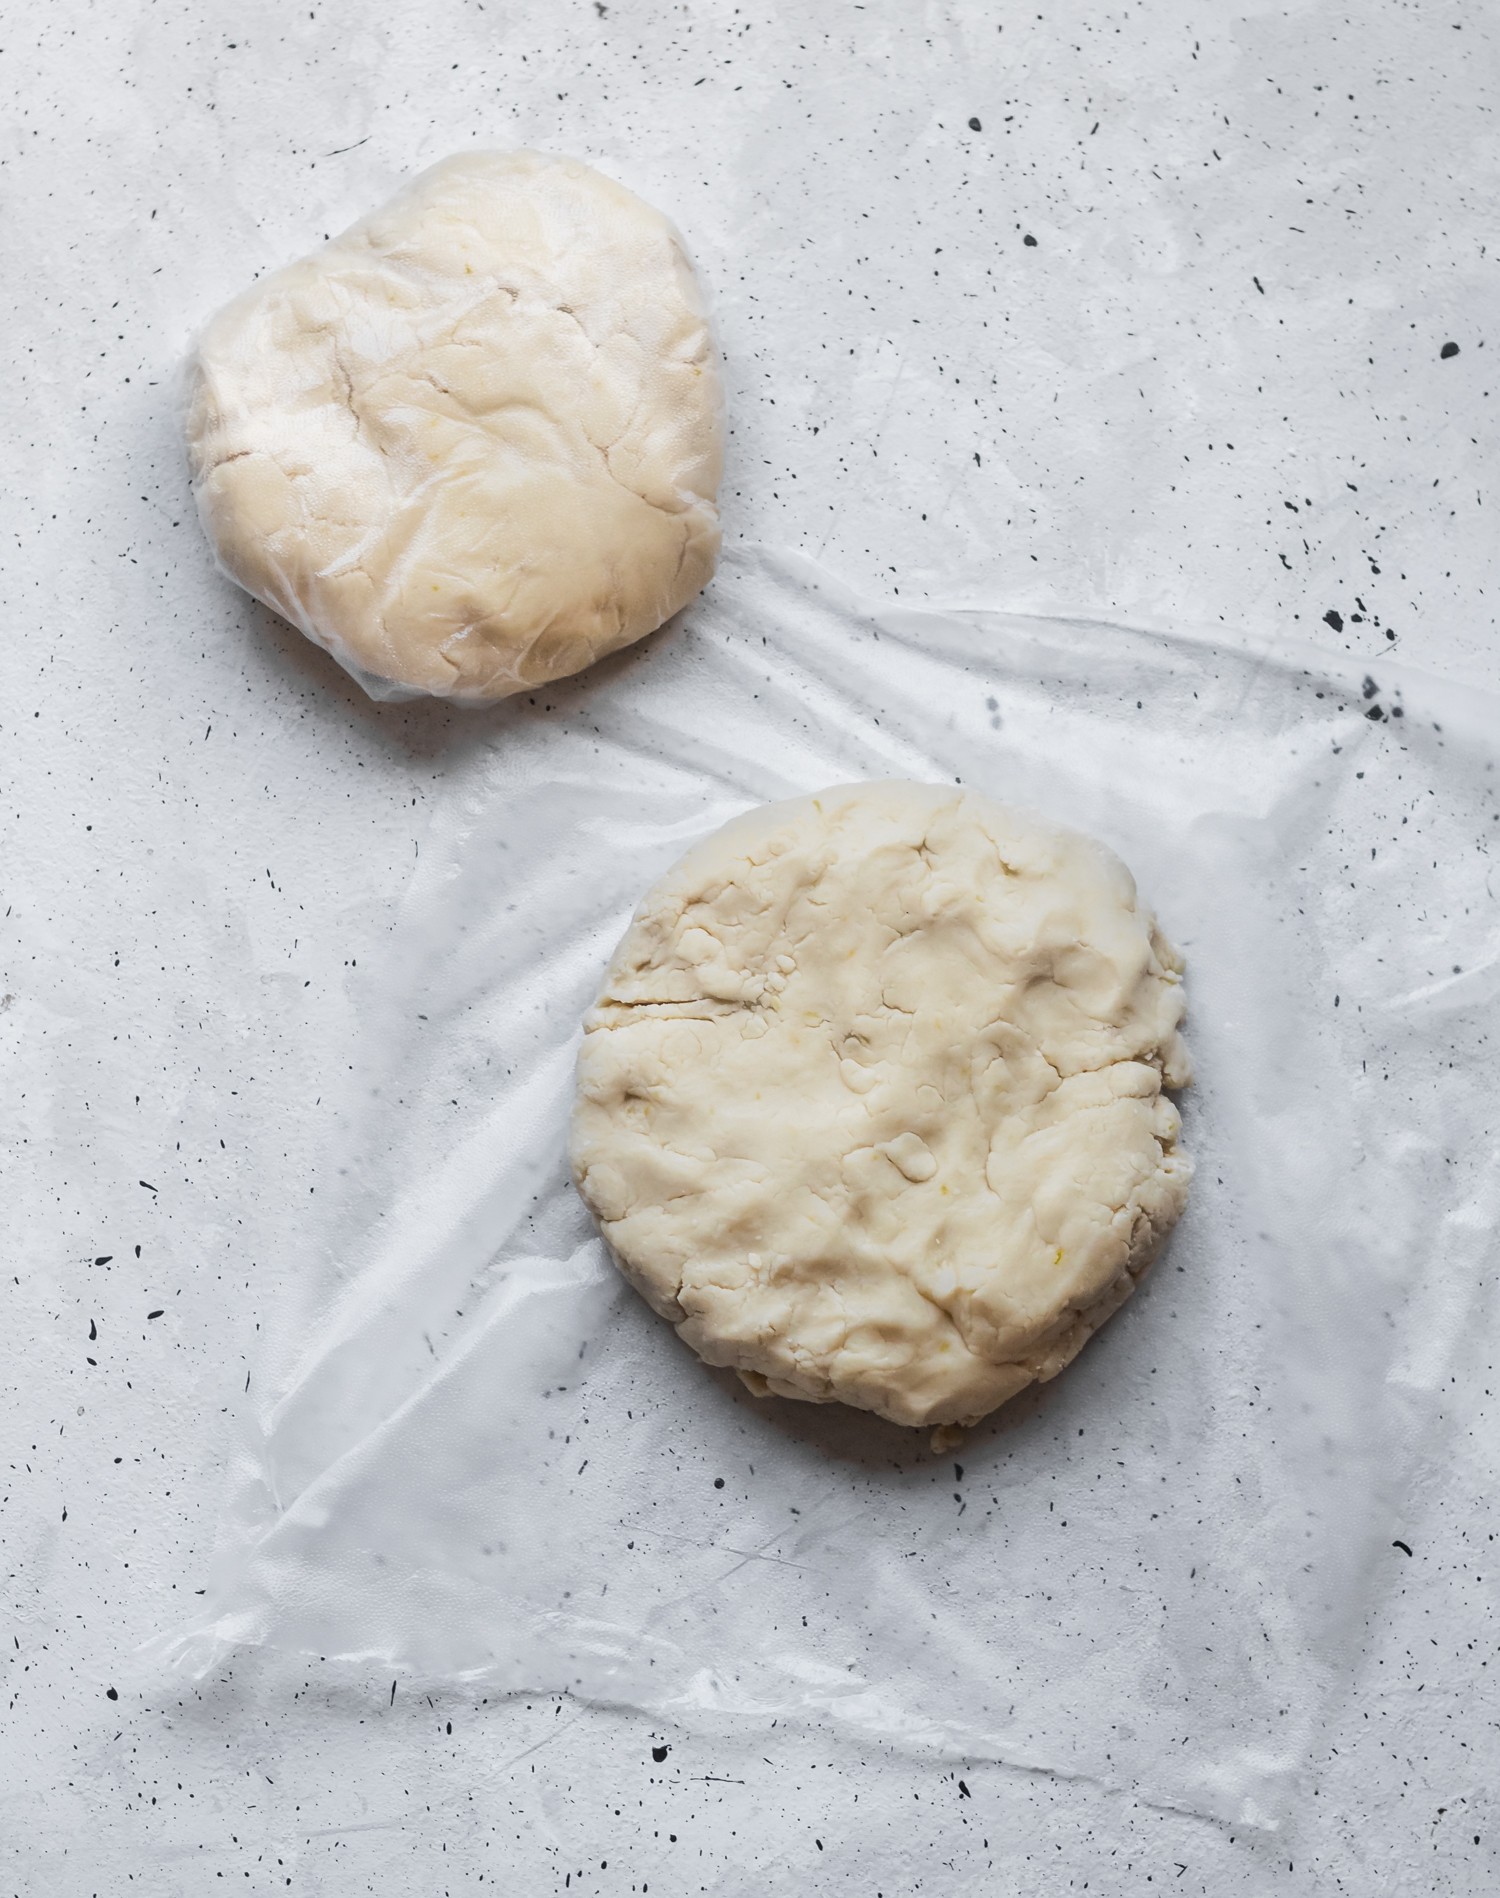 Two discs of dough wrapped with plastic sitting on a speckled table.